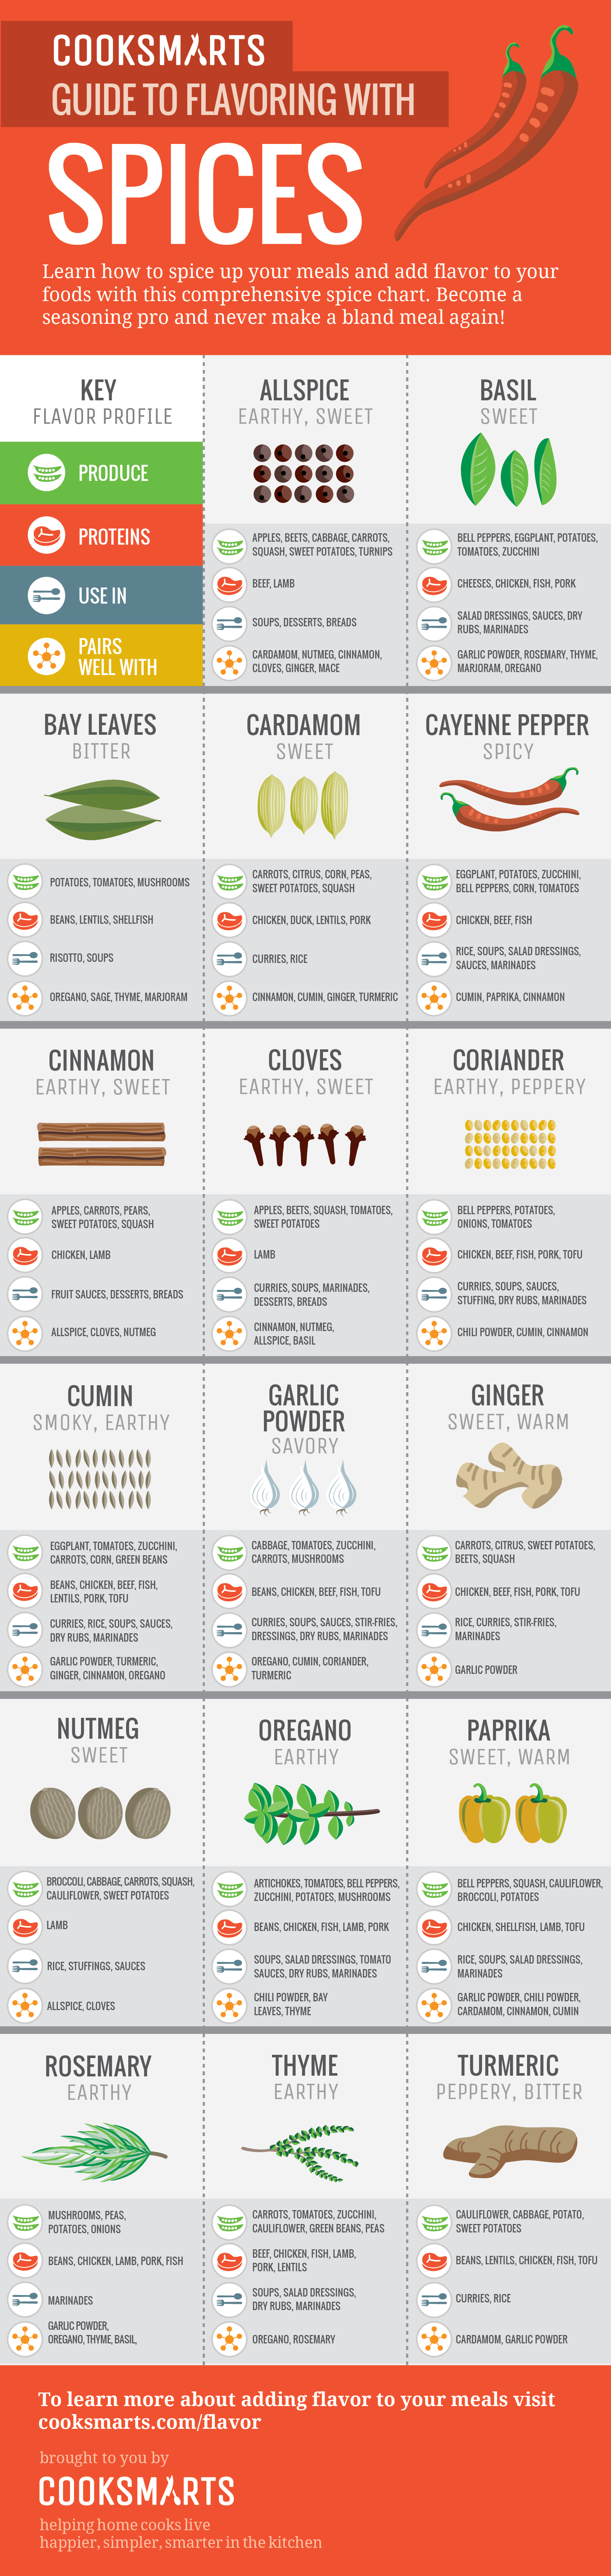 Cooksmarts Guide To Flavouring With Spices